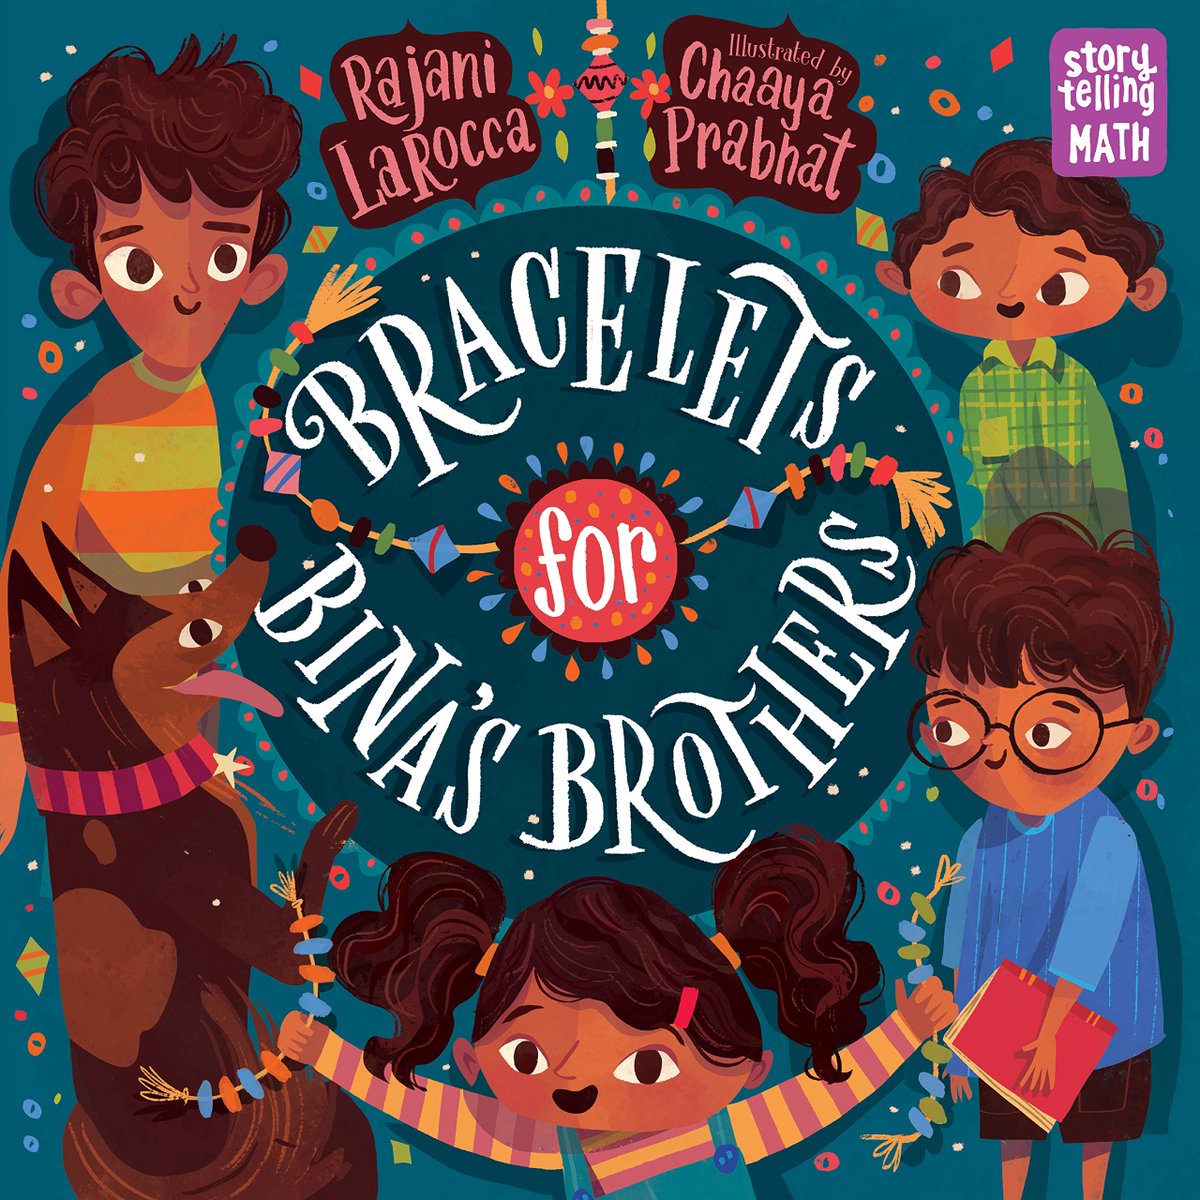 BRACELETS FOR BINA'S BROTHERS by  @rajanilarocca and  @chaayaprabhat is part of  @charlesbridge's fun and much-needed Storytelling Math series. Releases 4/20/21.